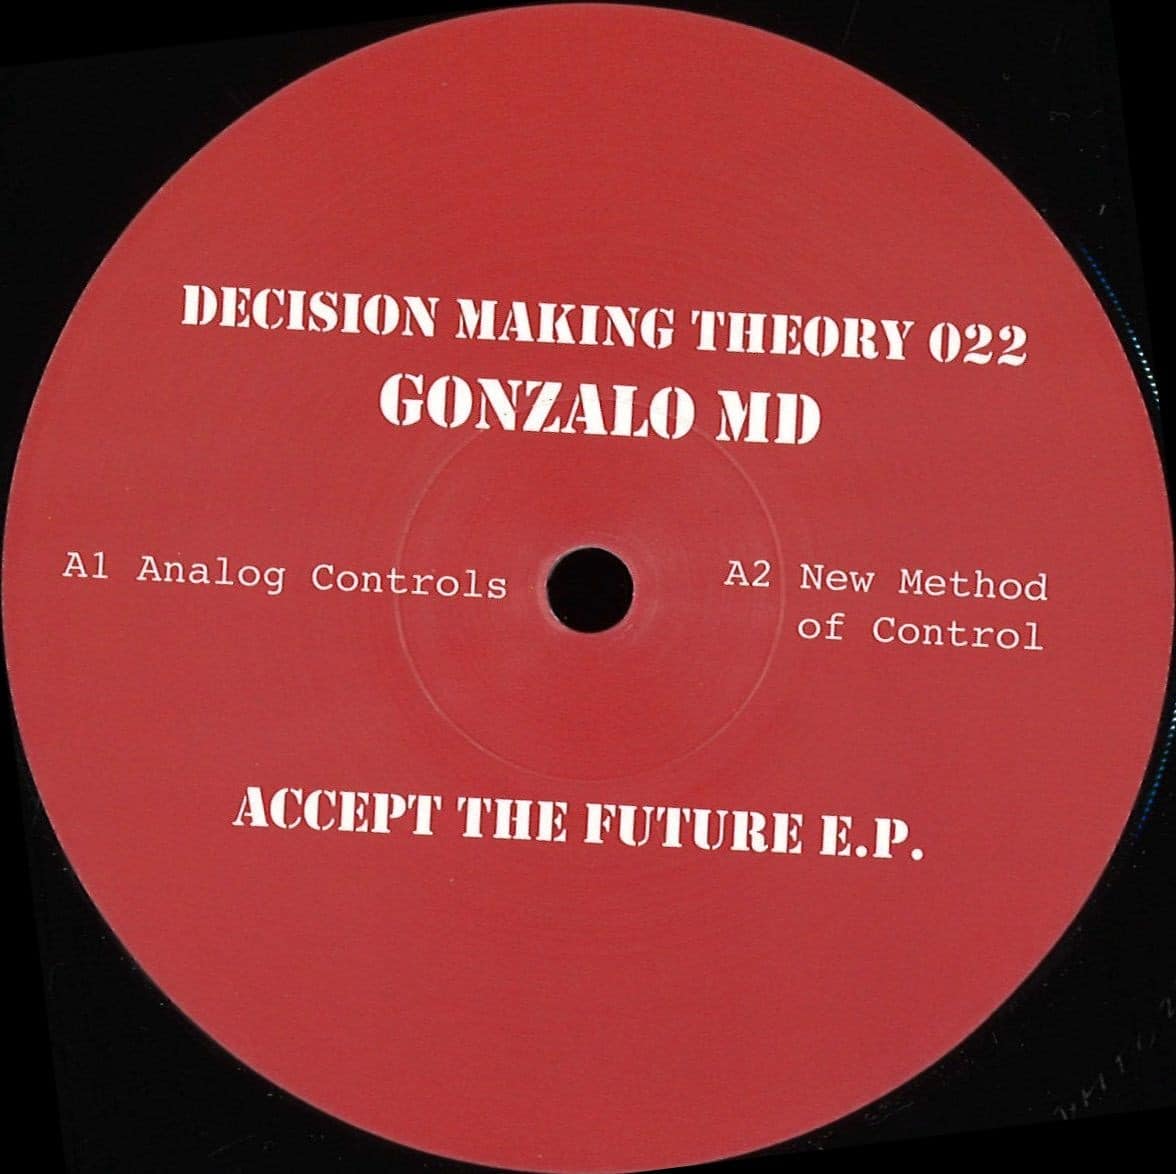 Gonzalo Md - Accept the Future E.P. - DMT022 - DECISION MAKING THEORY